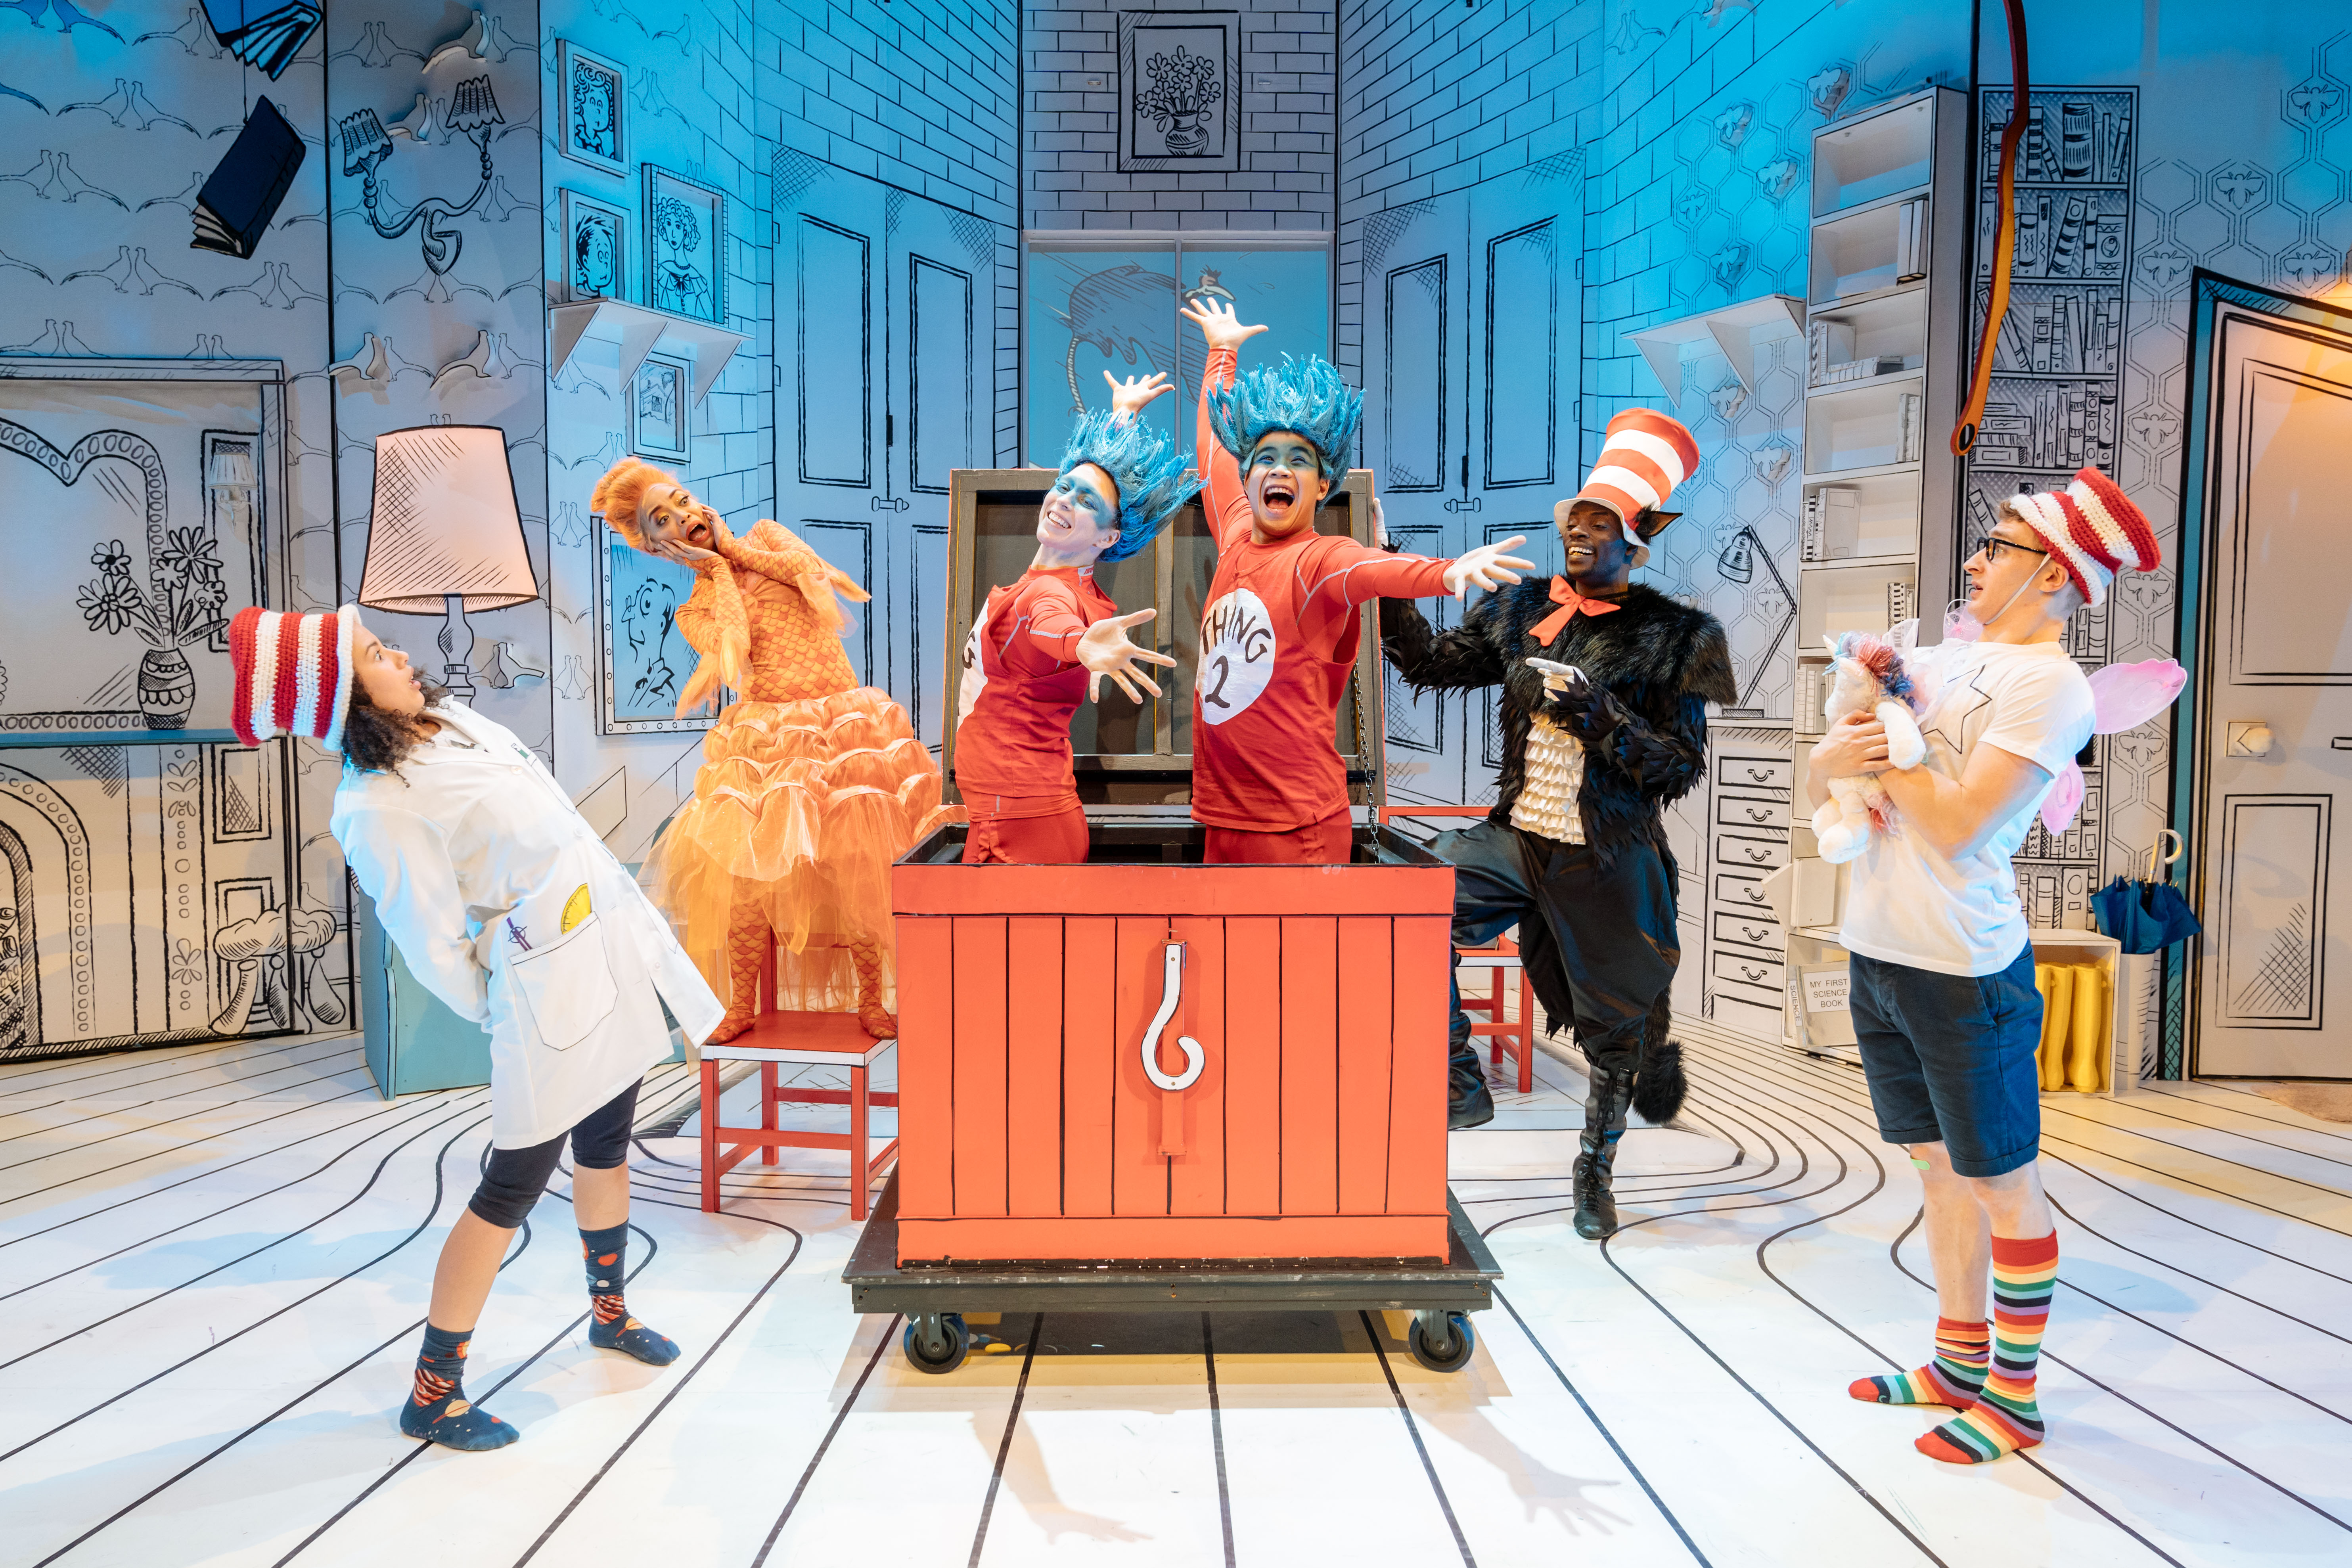 Production image from The Cat in the Hat. Sally, Fish, Cat and Boy exclaim as Thing 1 and Thing 2 appear from a red crate.